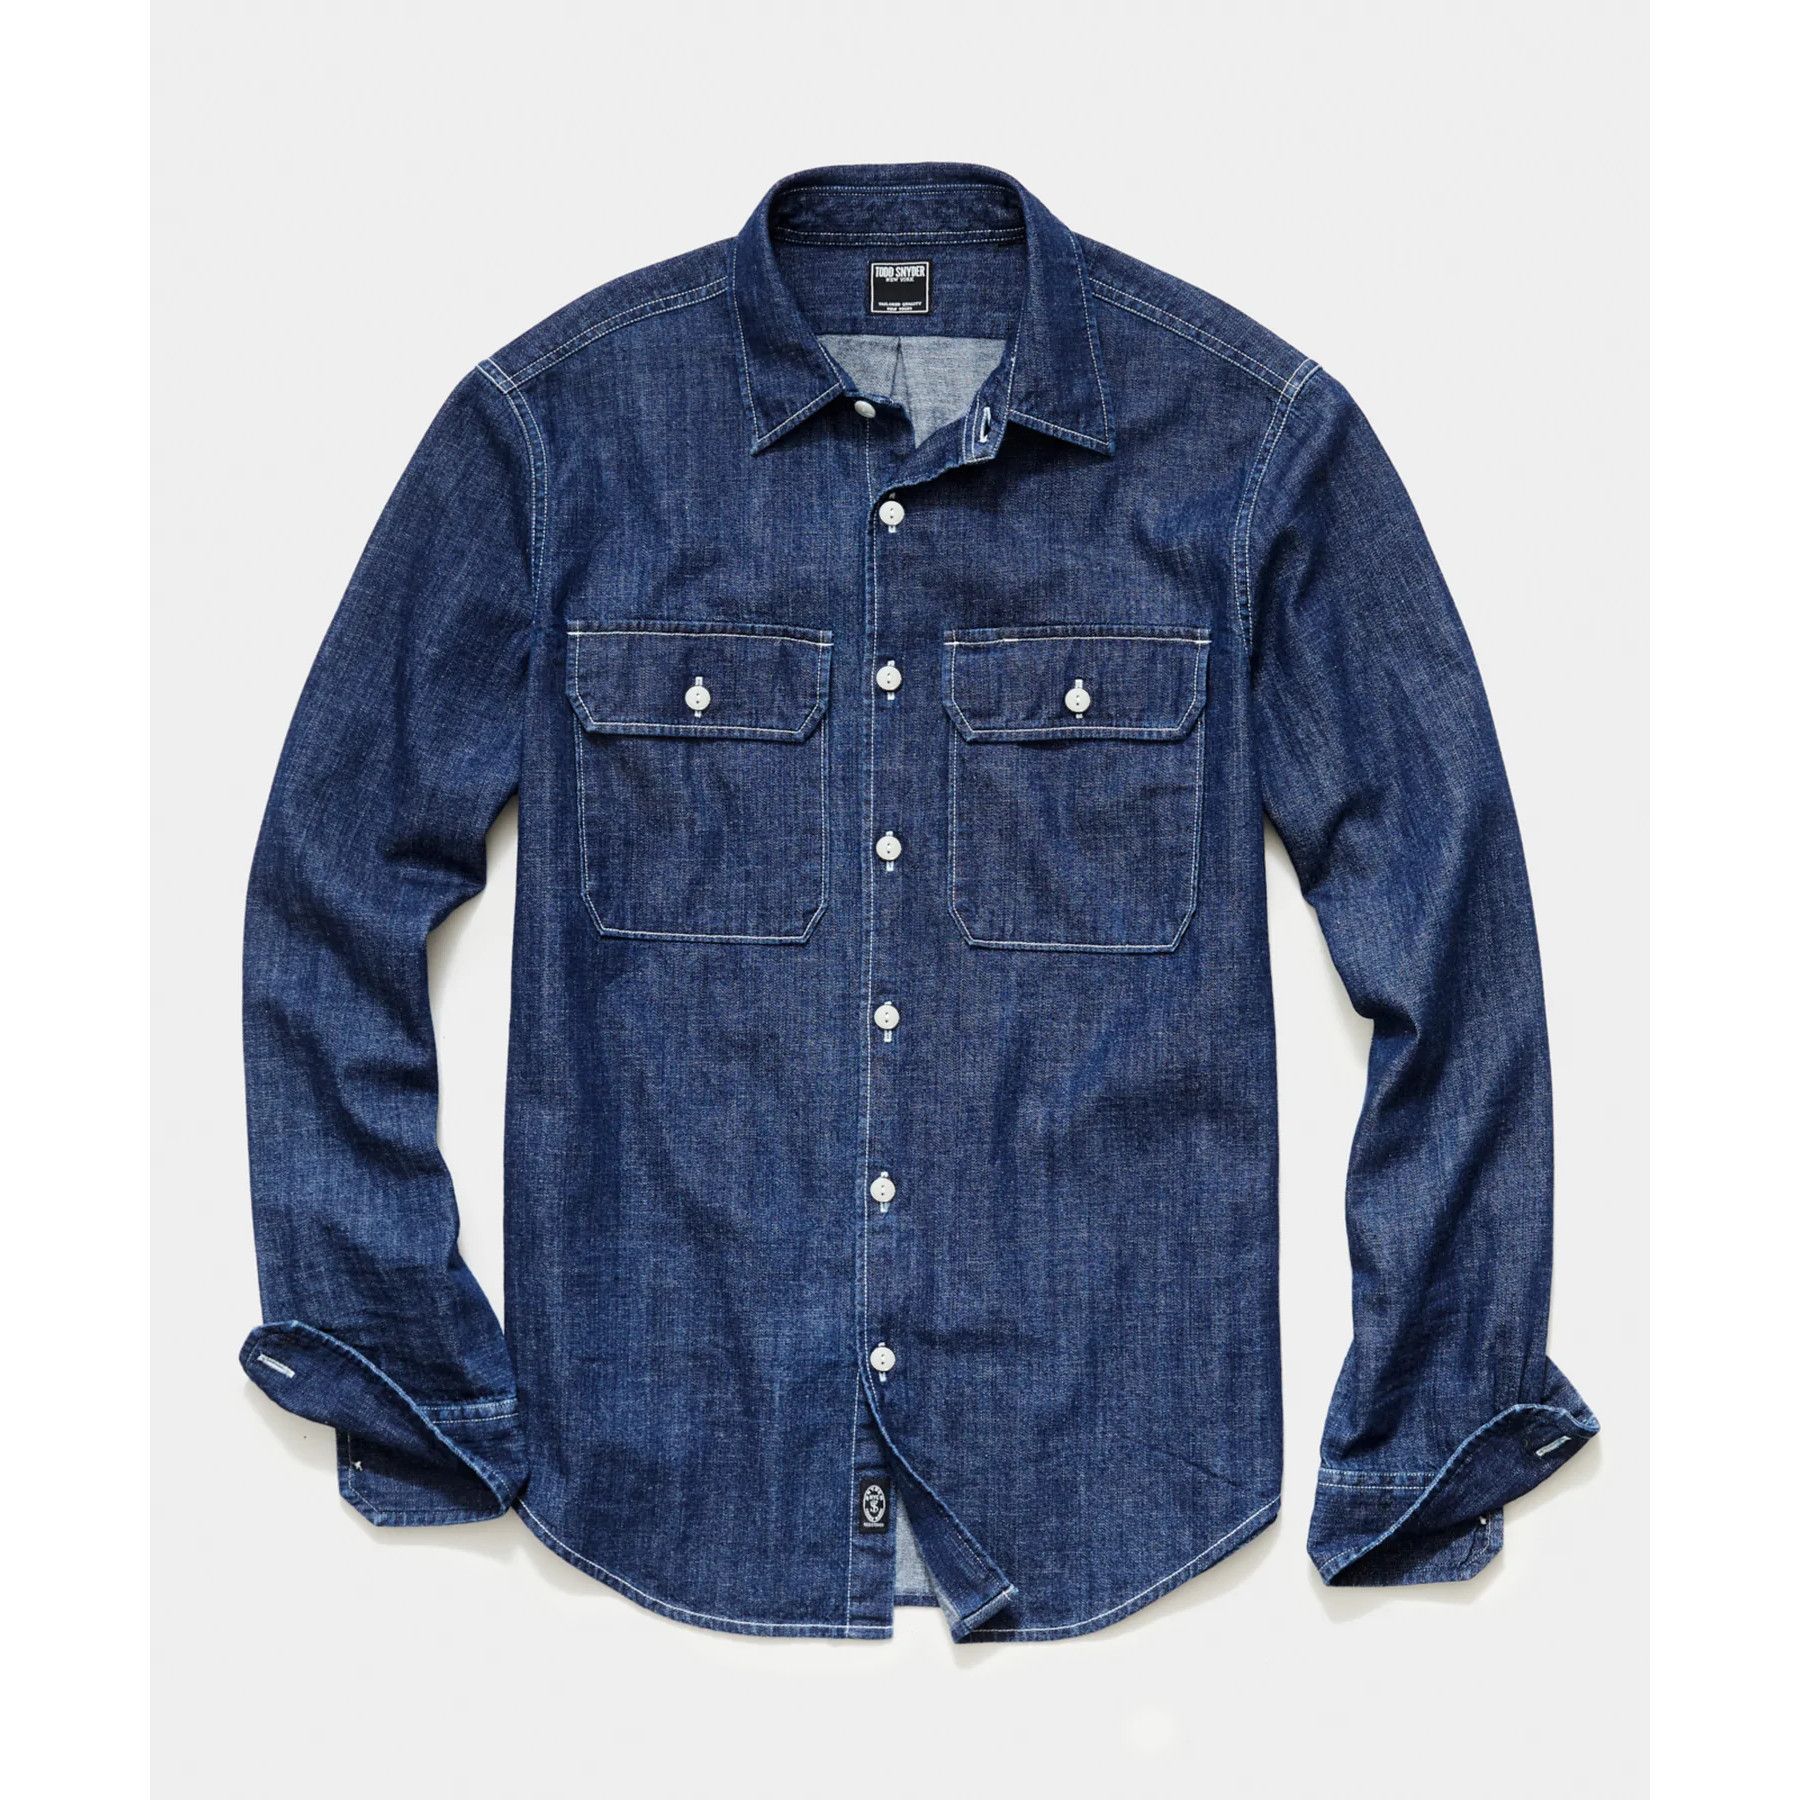 Layer Up With Our Picks of the Best Men's Denim Shirts - The Manual